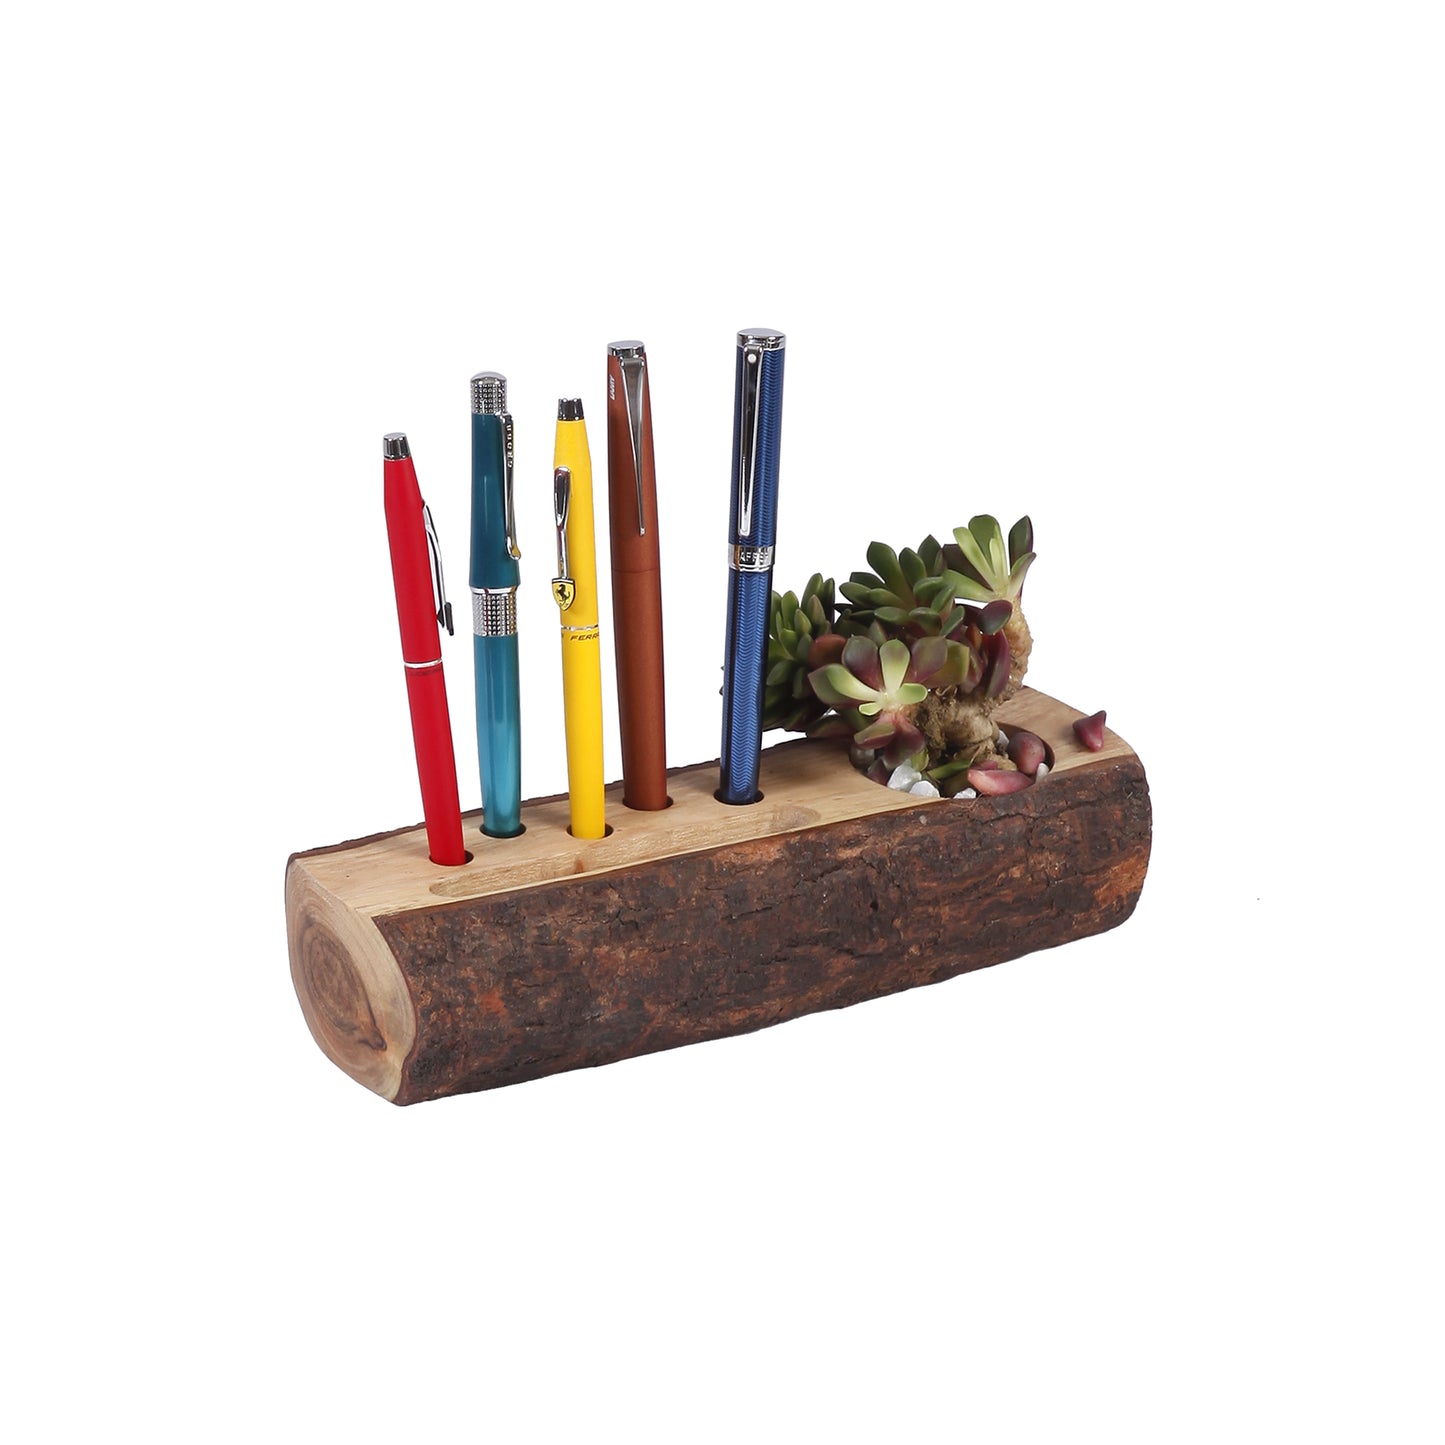 A Tiny Mistake Desk Wooden Log 3 in 1 Planter, Indoor Planter for Home Decor, Perfect for Work from Home Desk